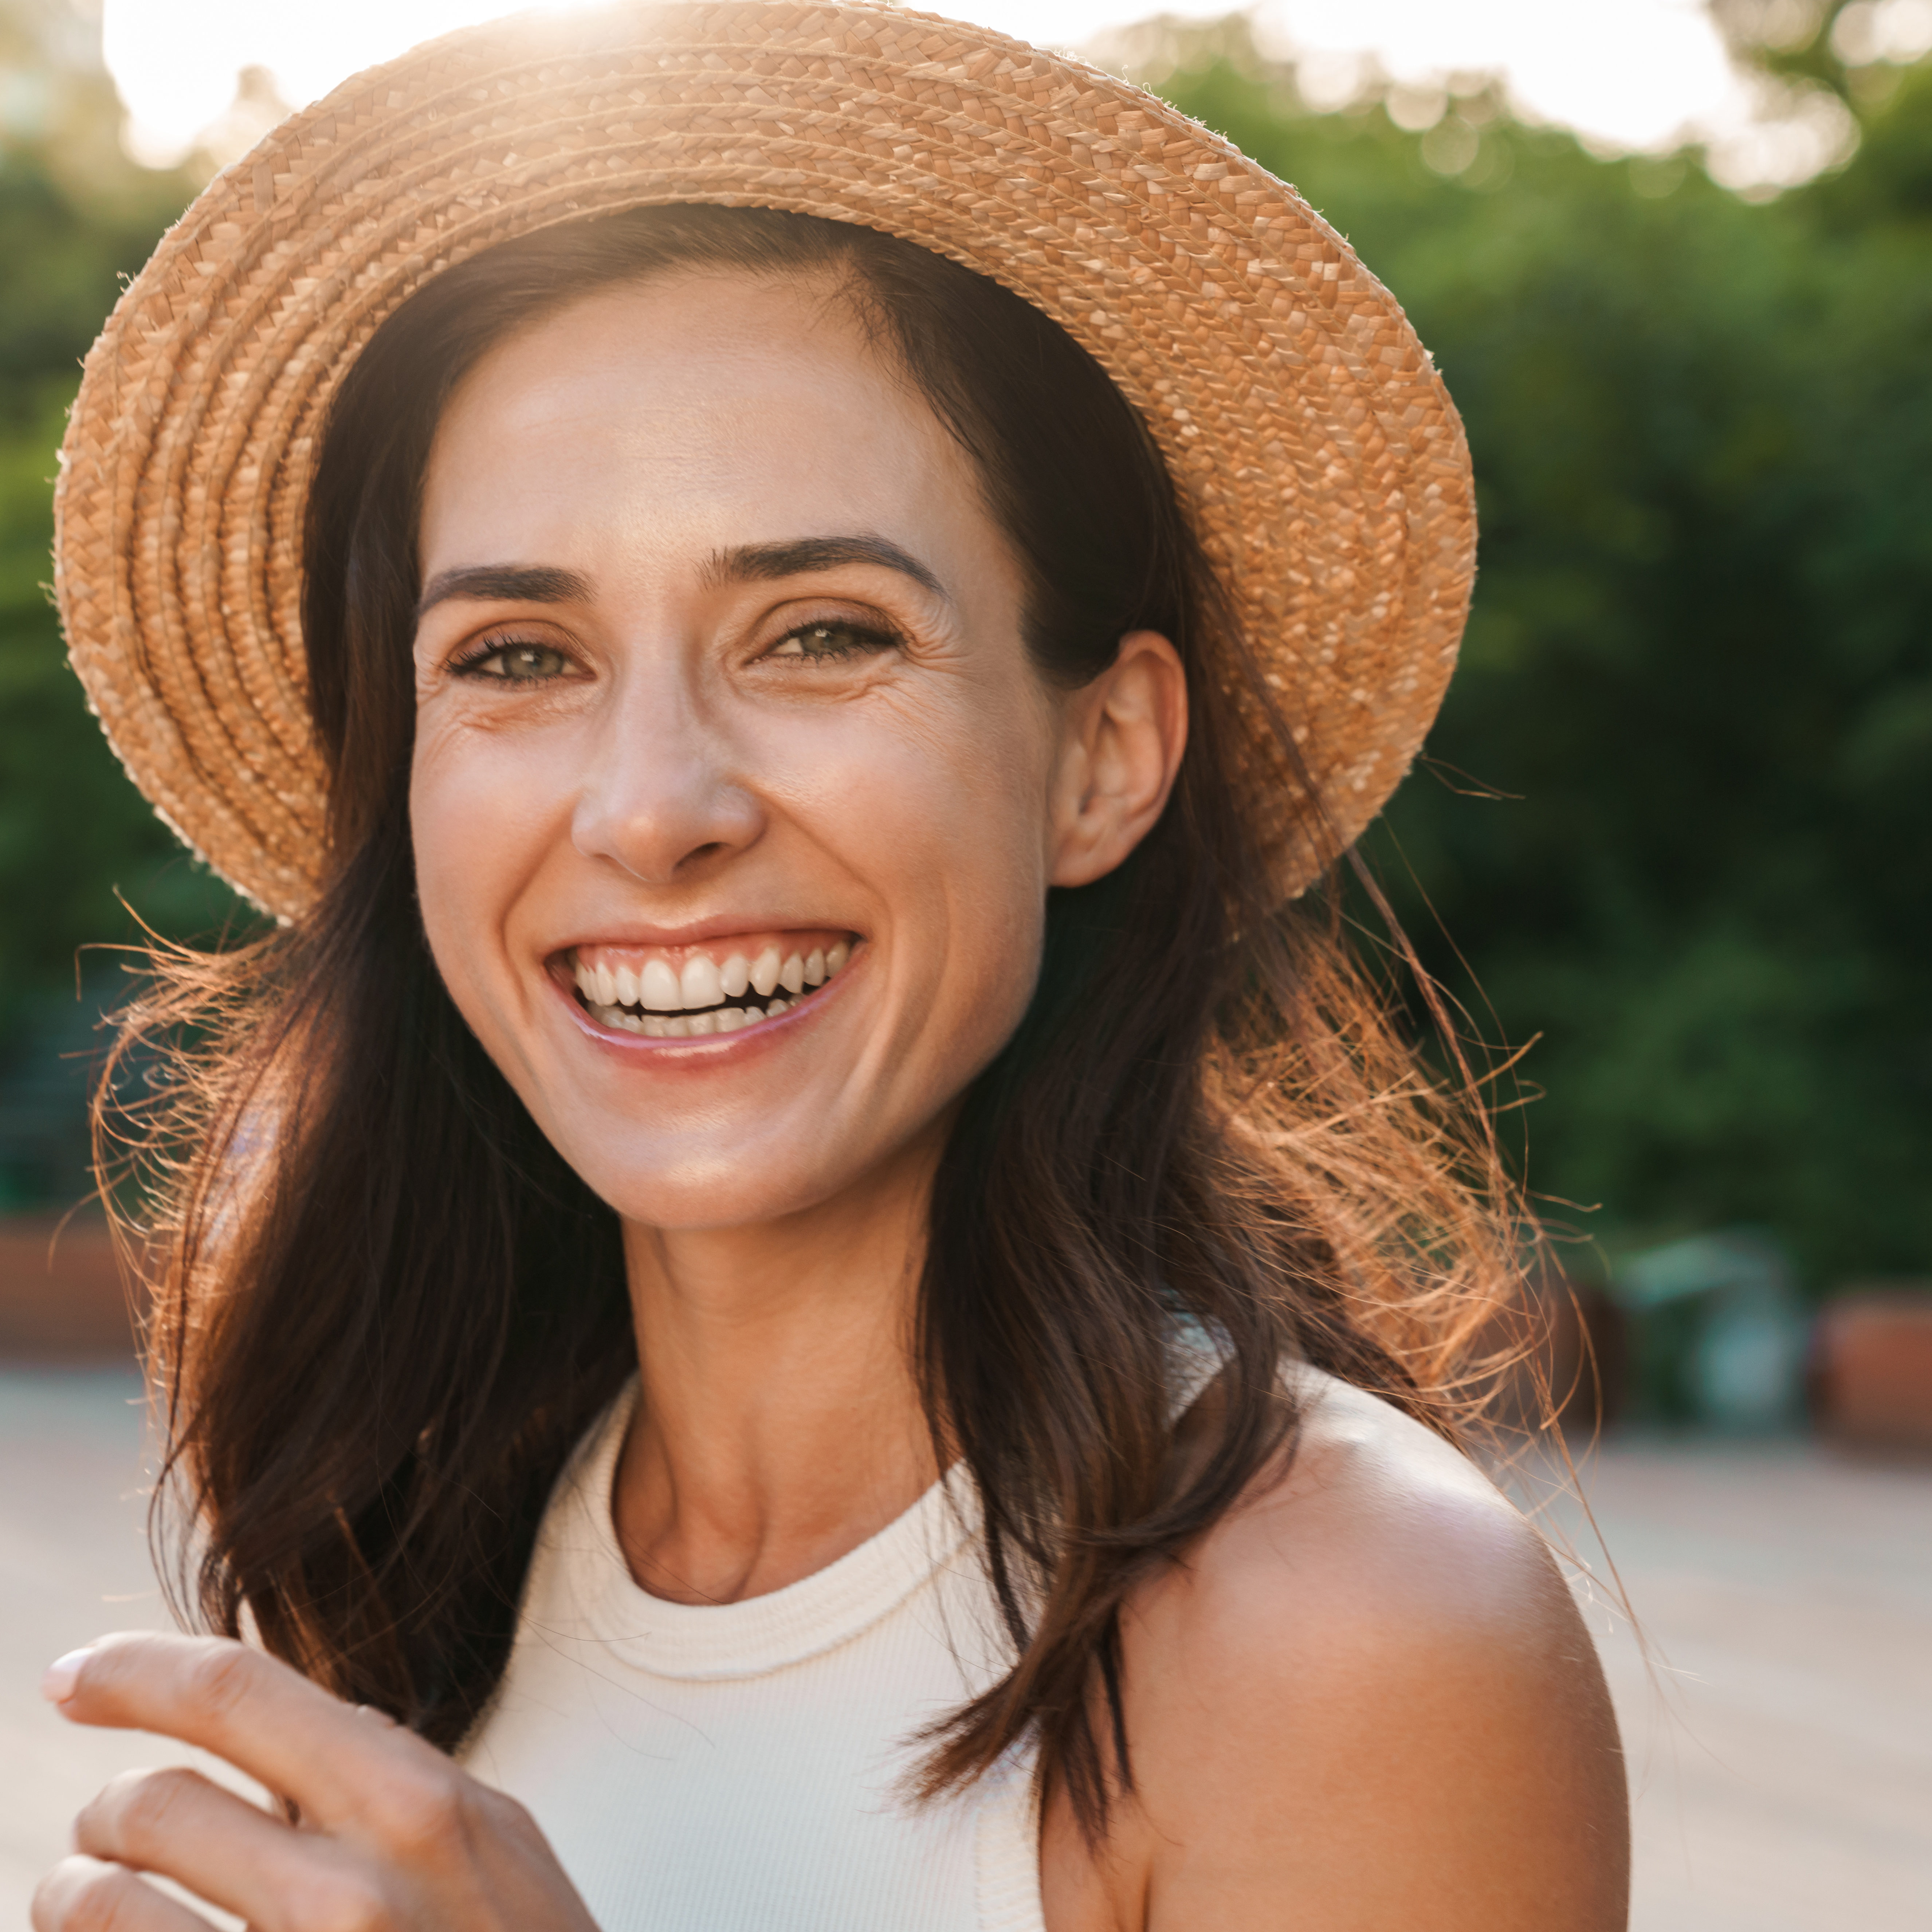 Image of beautiful middle-aged woman wearing straw hat laughing and looking at camera while walking in summer park